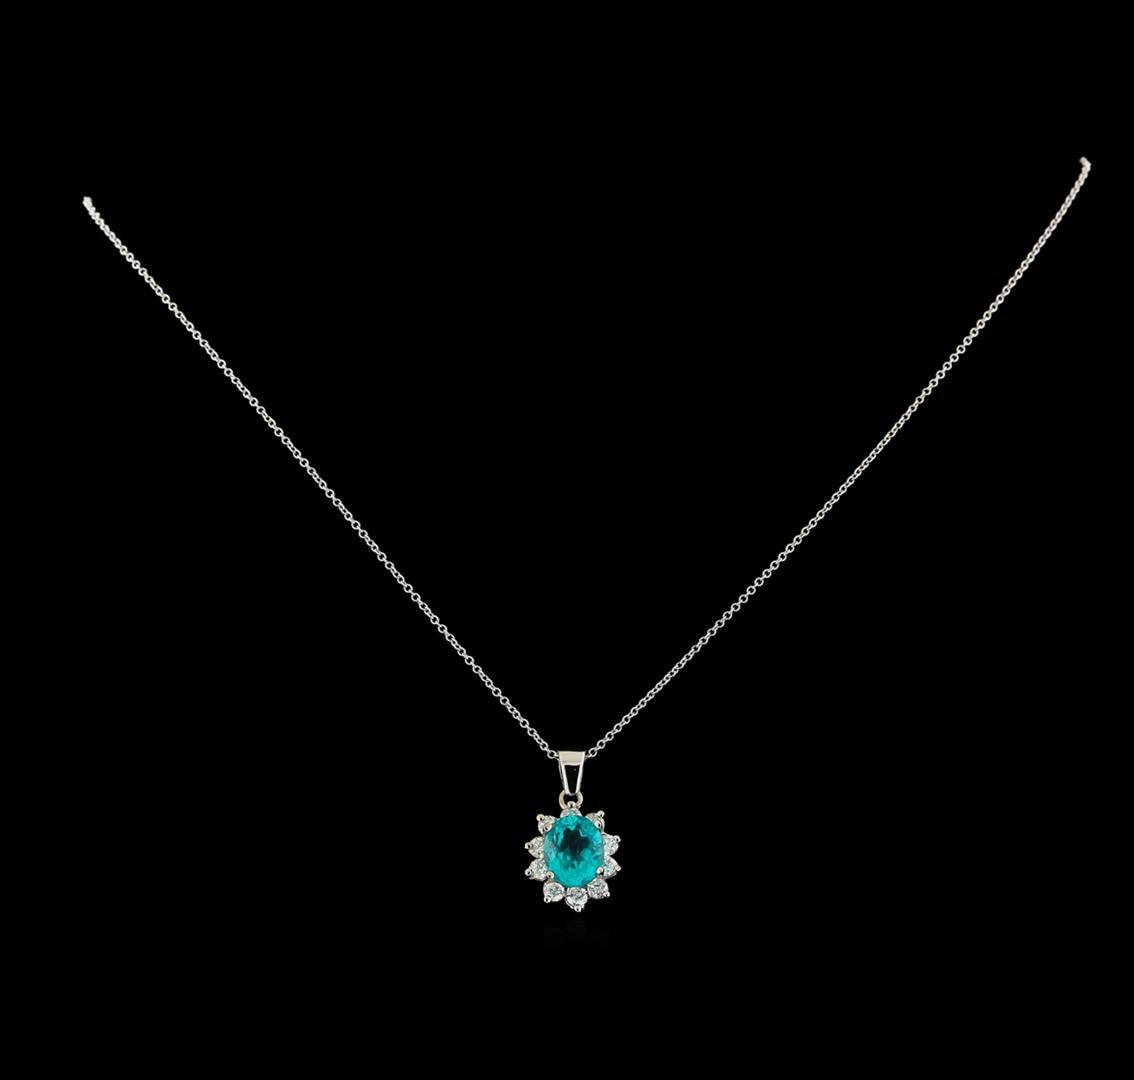 3.04 ctw Apatite and Diamond Pendant With Chain - 14KT White Gold